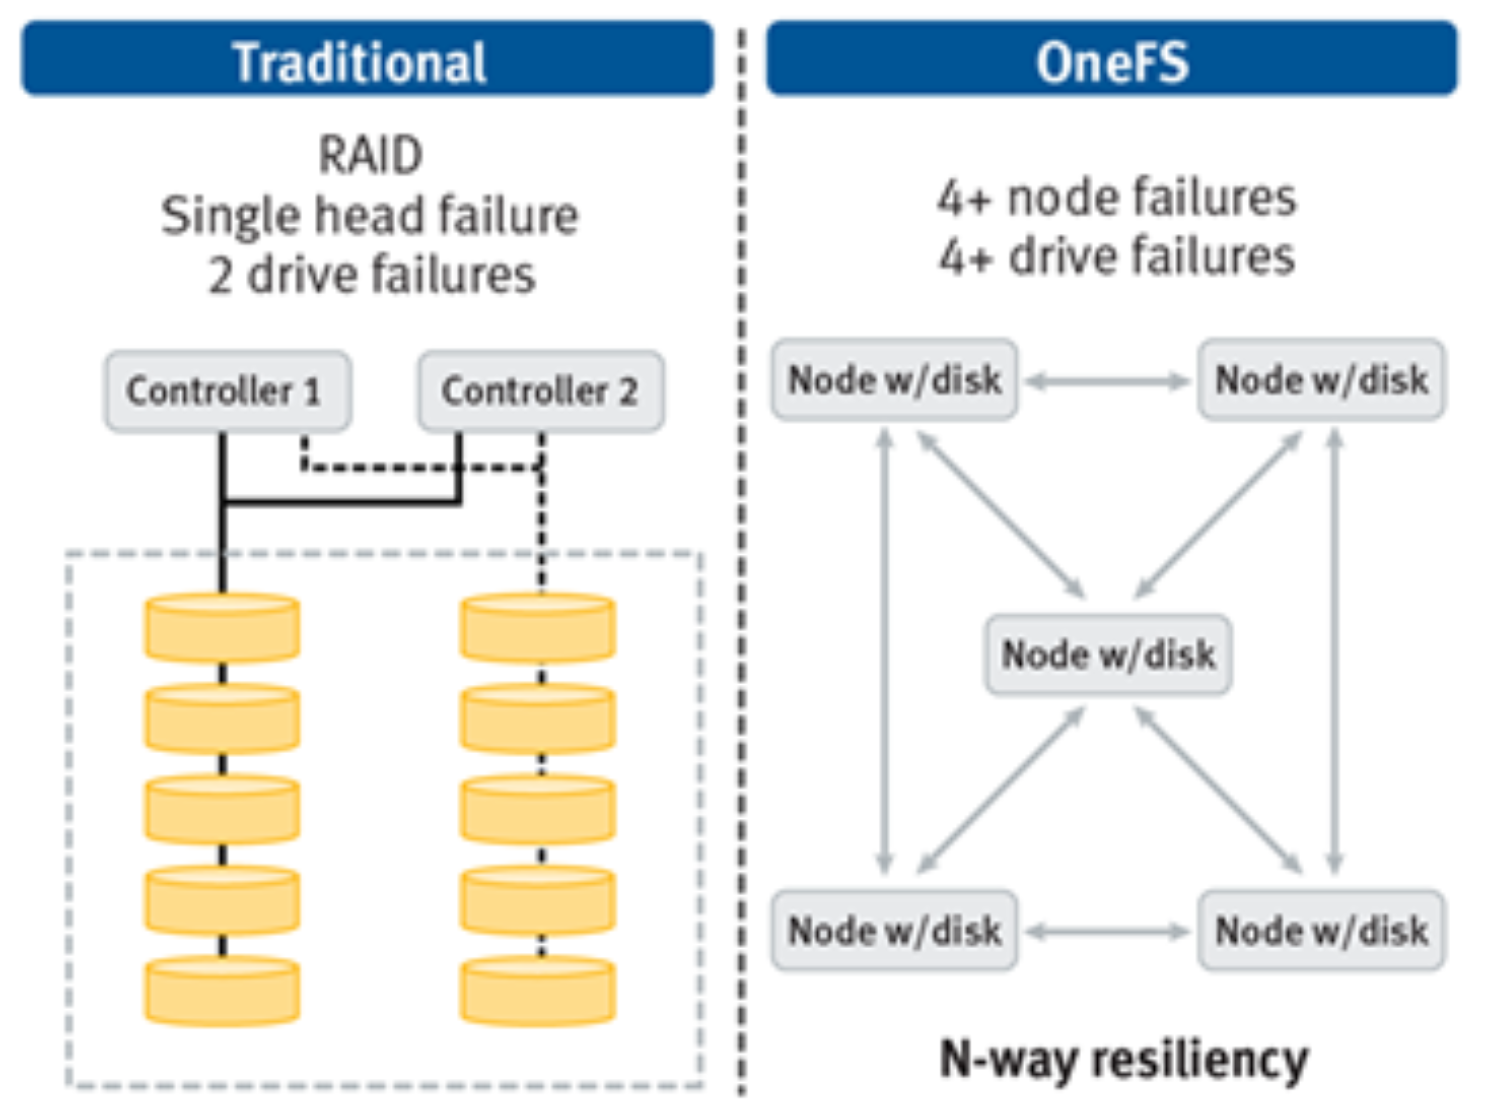 Graphic depicting OneFS n-way resilience using FEC based data +4 data protection.